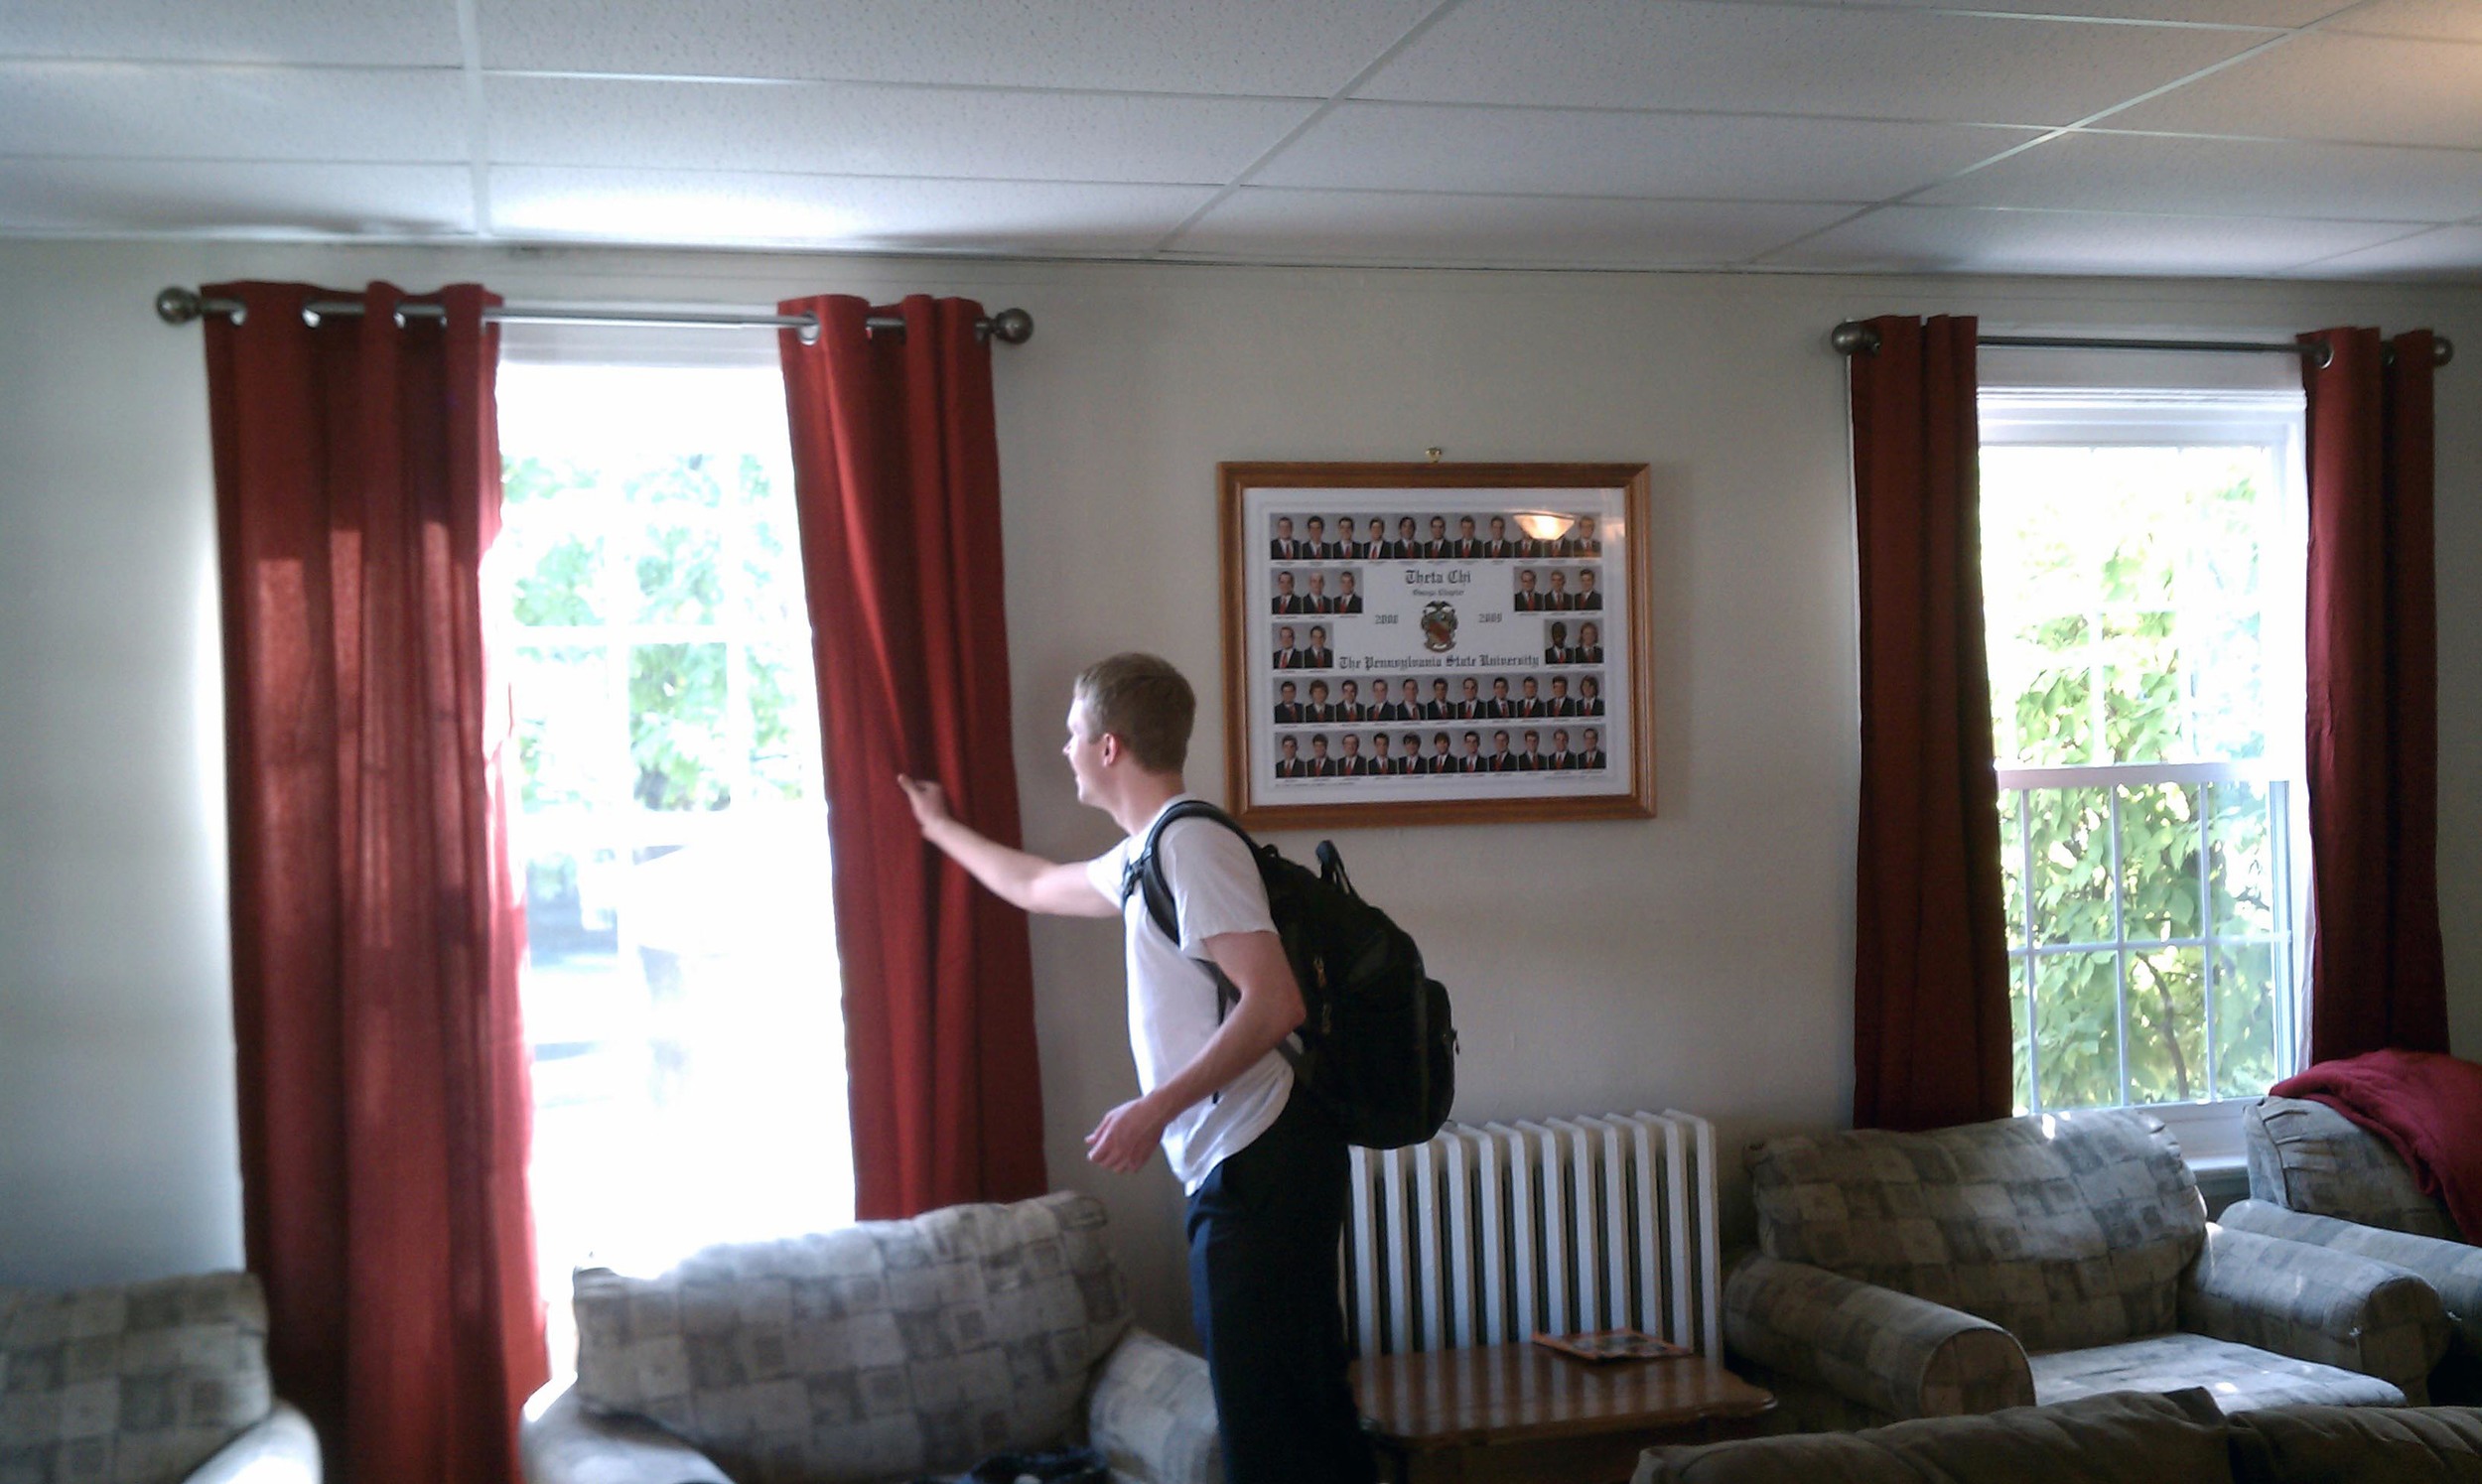  Eric Cushing checks out the new curtains on the first floor
Sept. 2012 